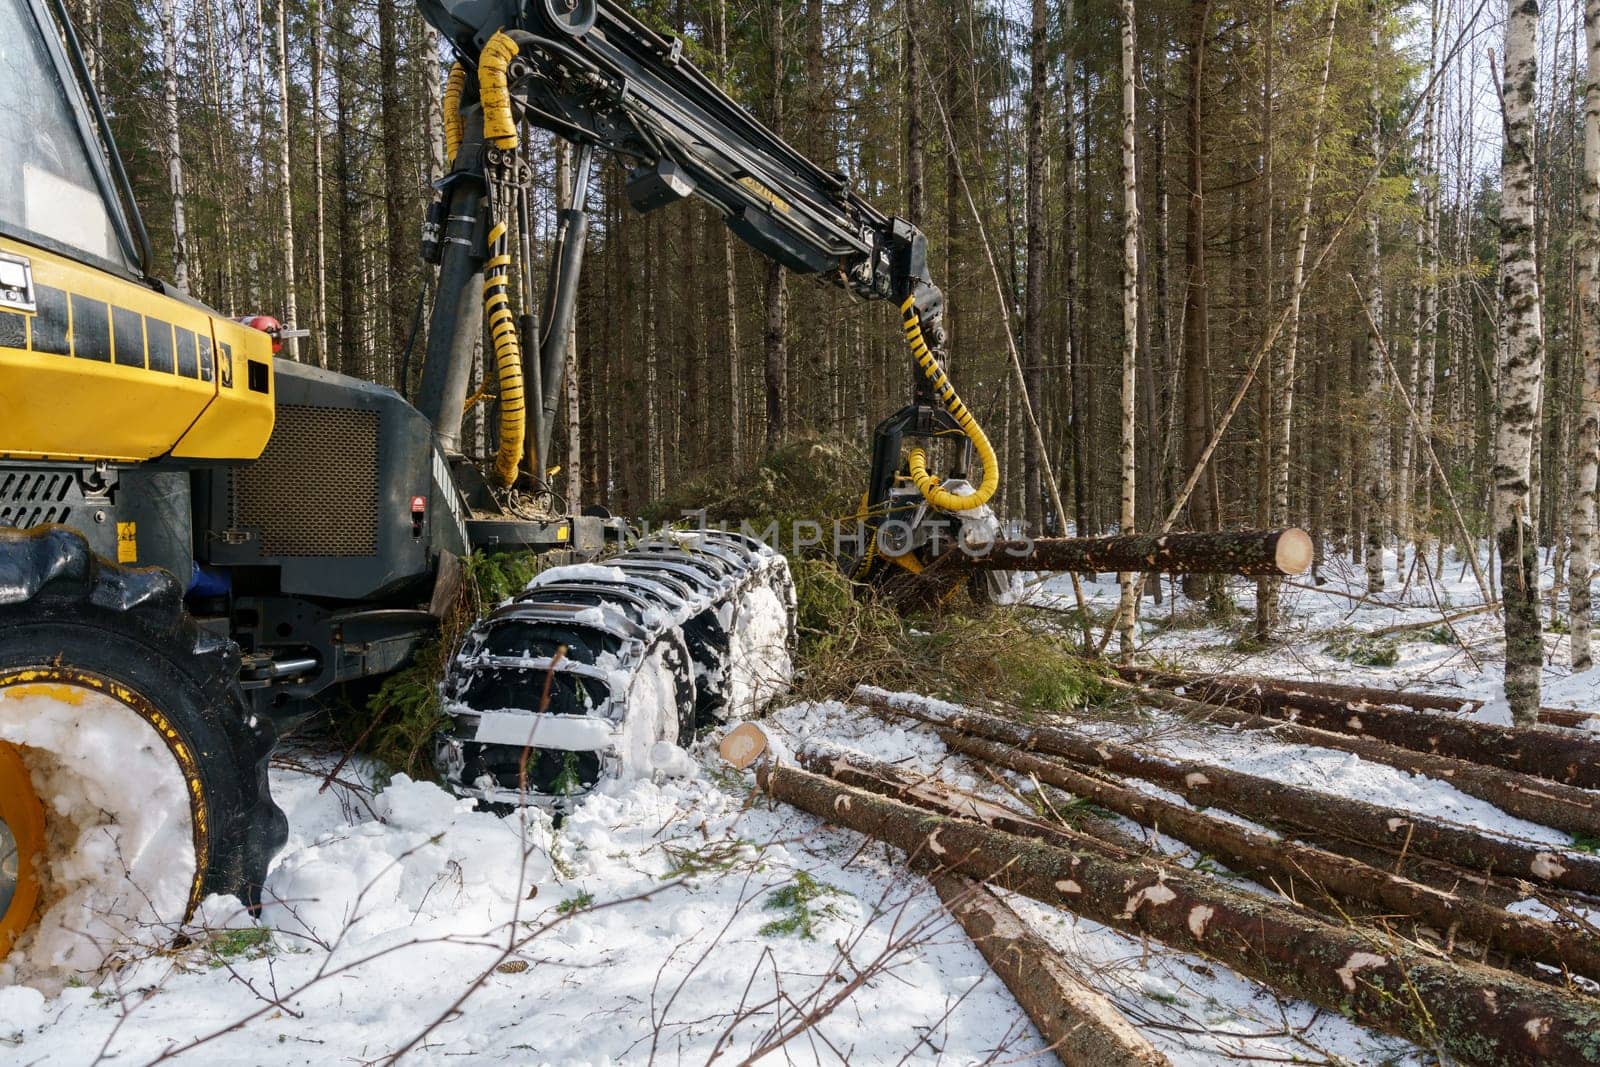 Image of log loader cut down trees in winter forest